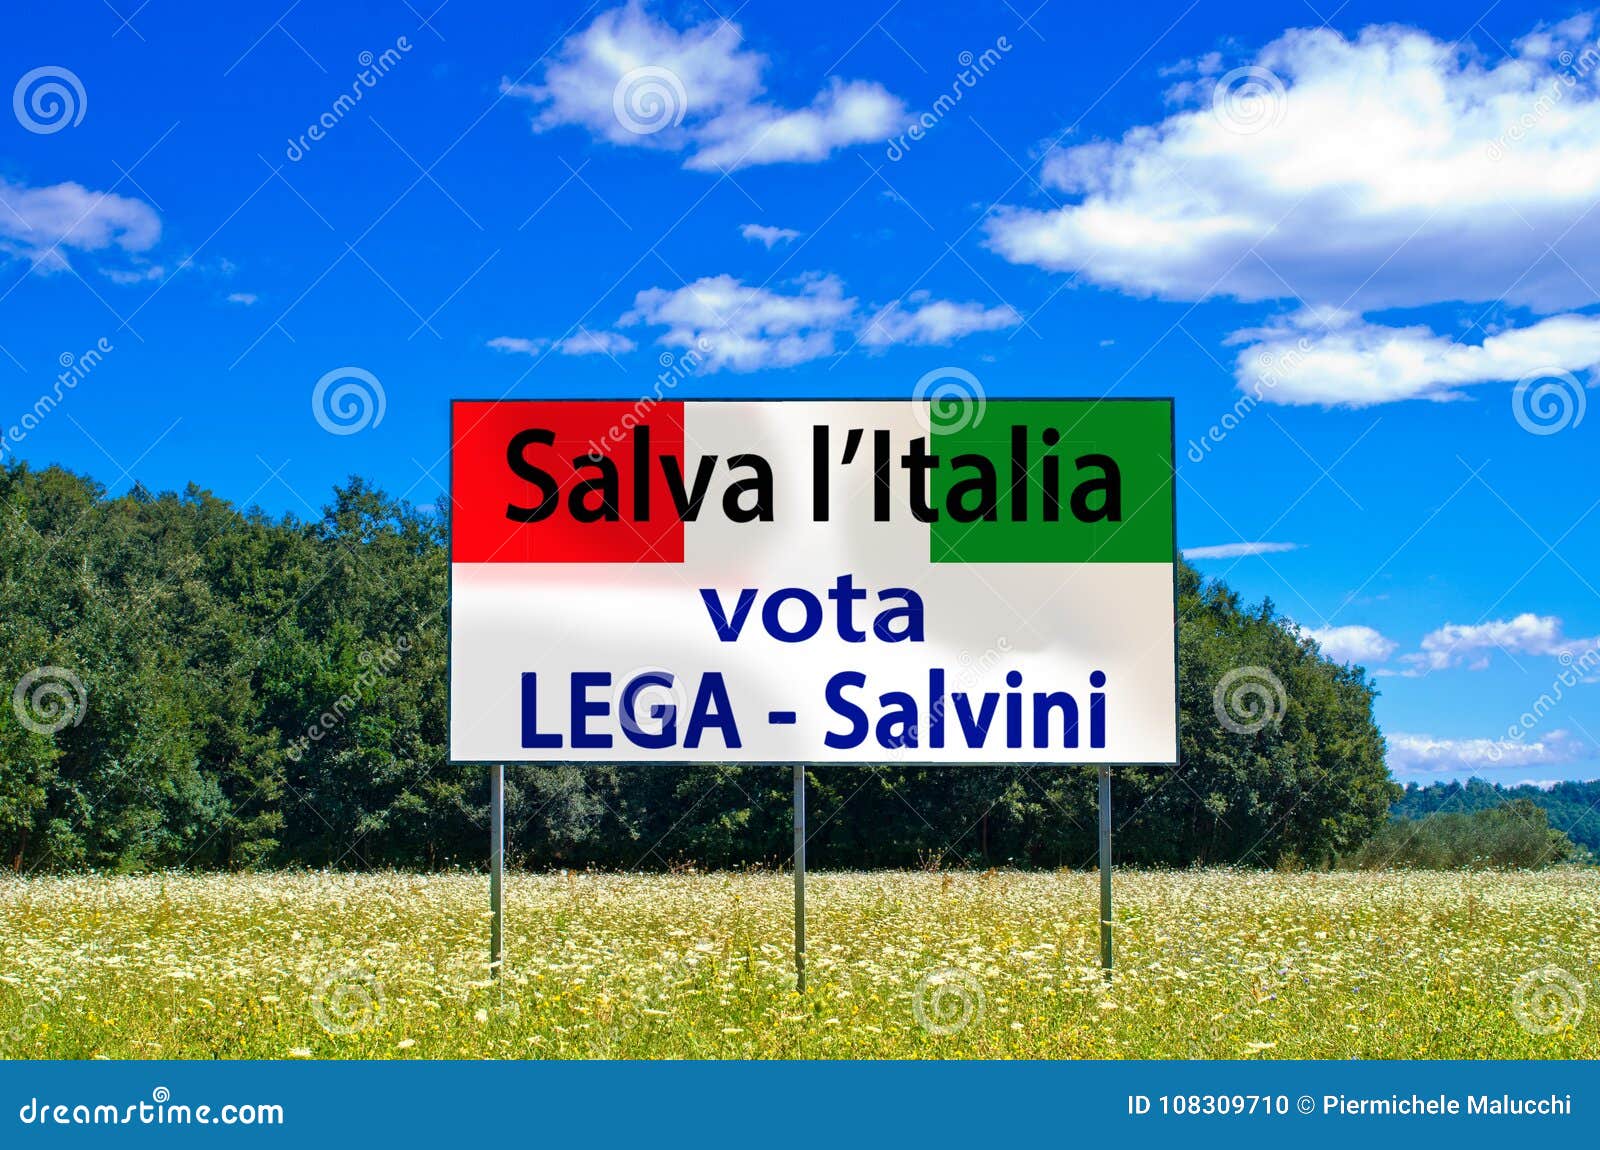 in the next elections save italy, vote lega nord, salvini